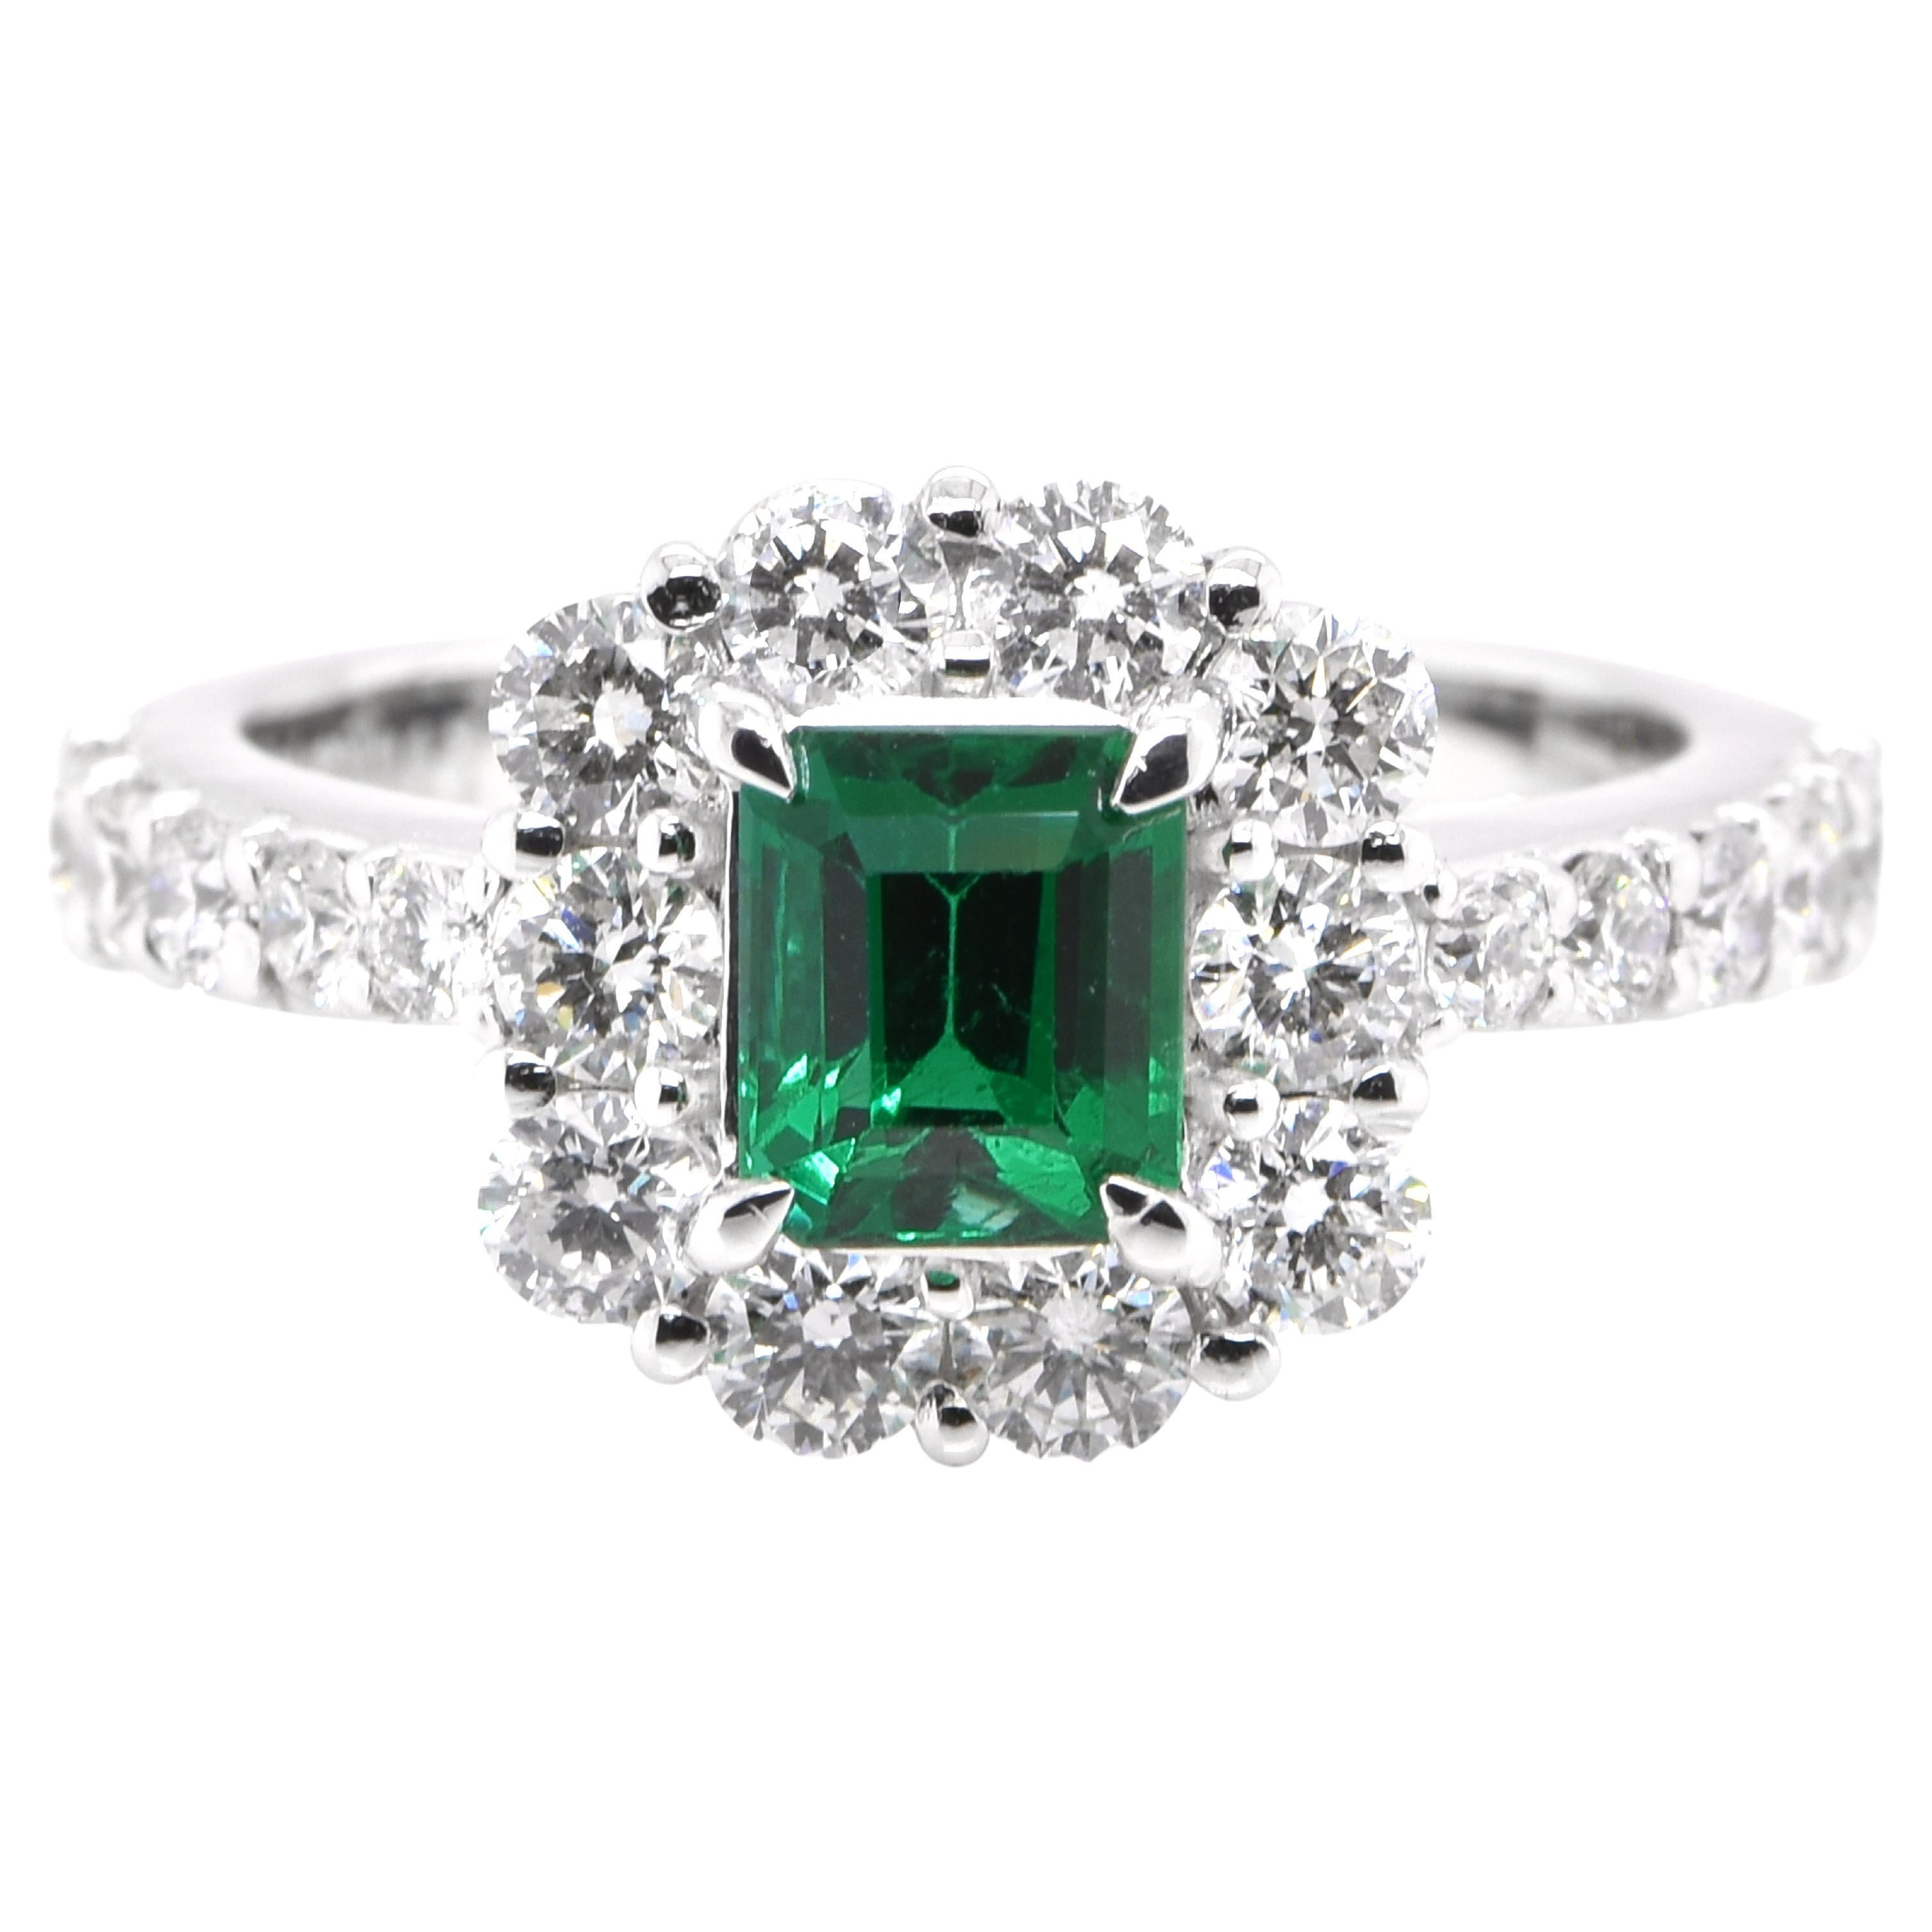 0.89 Carat Vivid Green Emerald and Diamond Halo Ring Set in Platinum For Sale